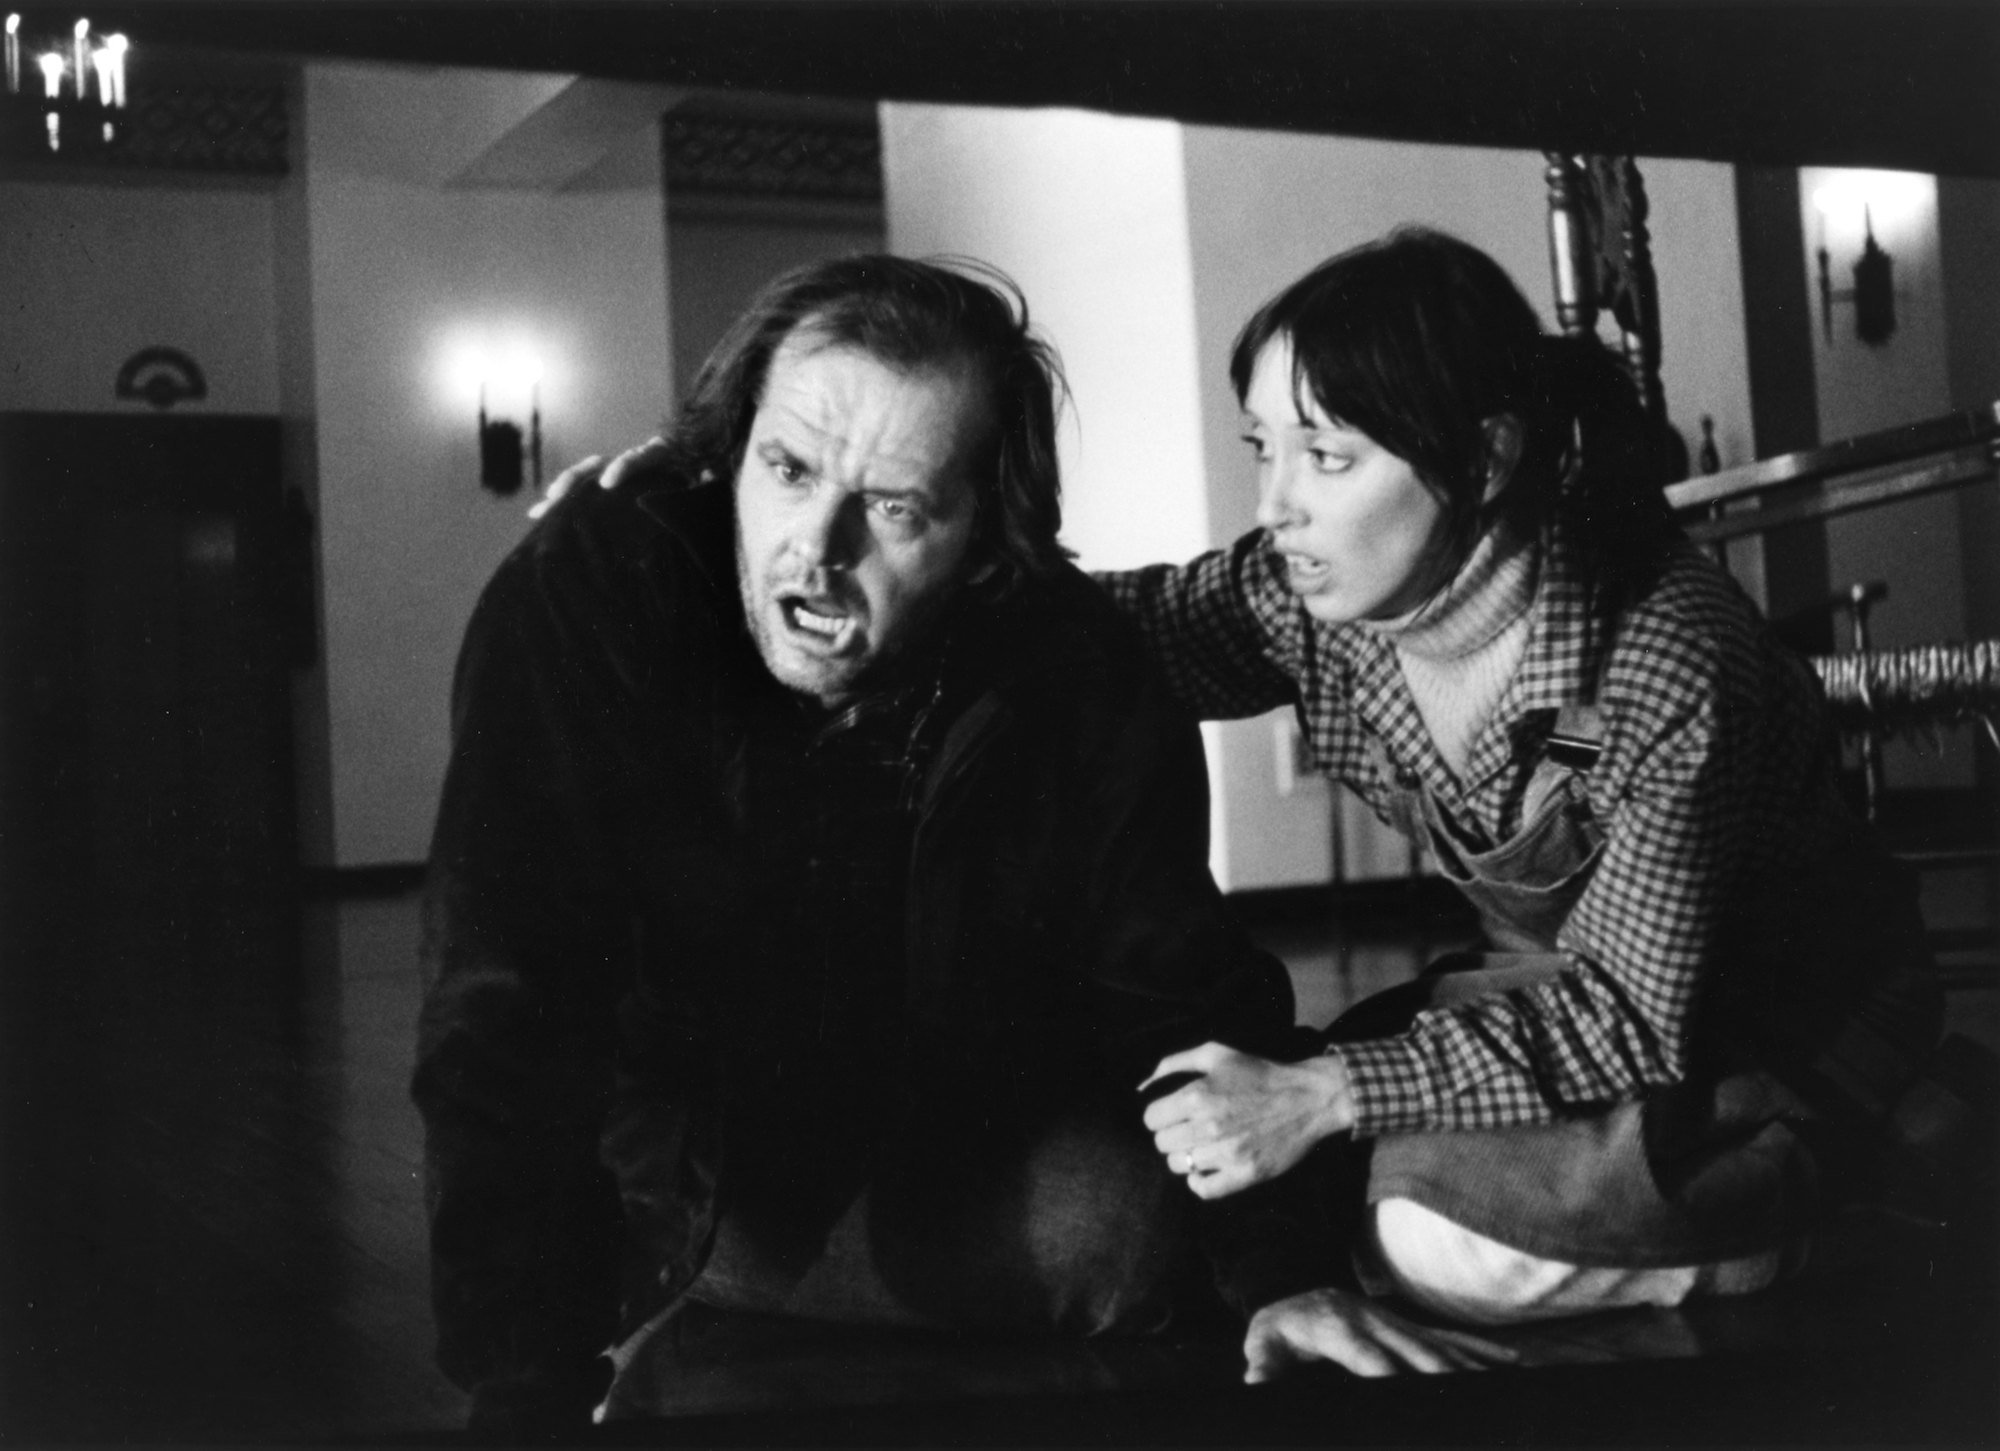 (L-R) Jack Nicholson and Shelley Duvall in a scene from the Warner Bros movie 'The Shining'